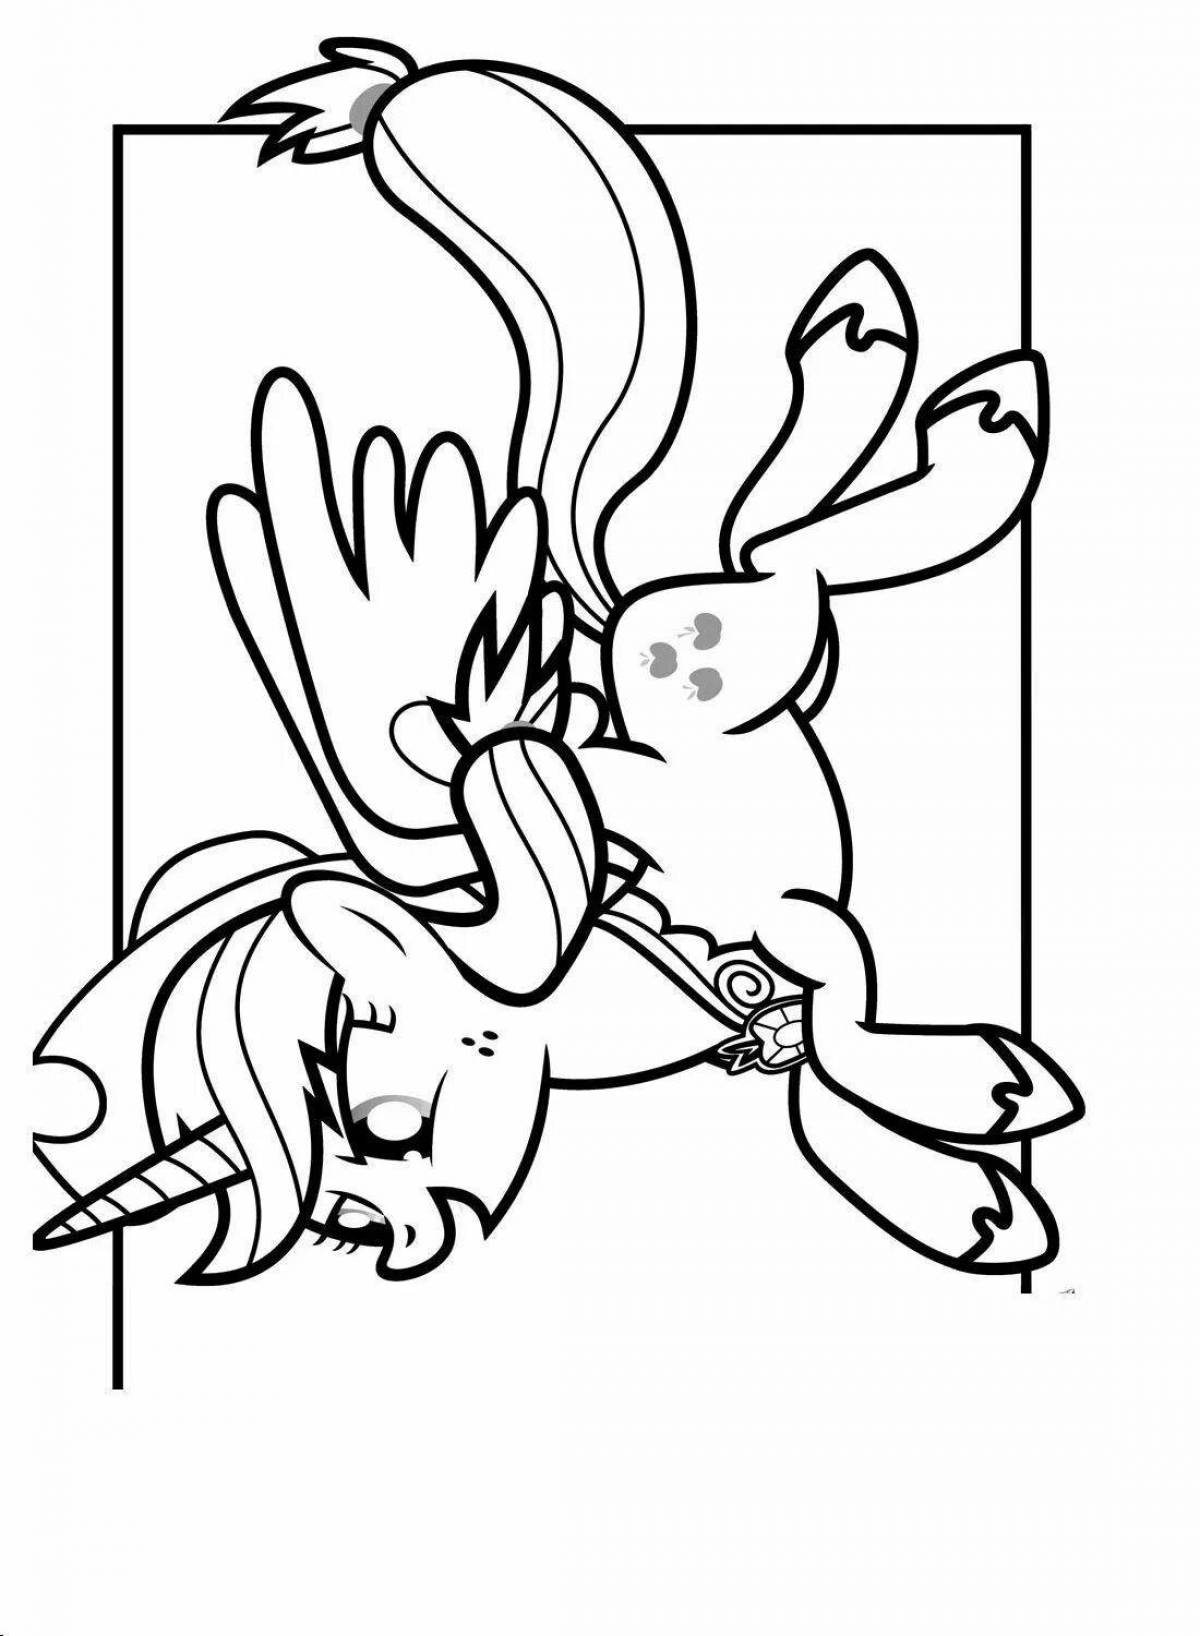 Vibrant pony play time coloring page